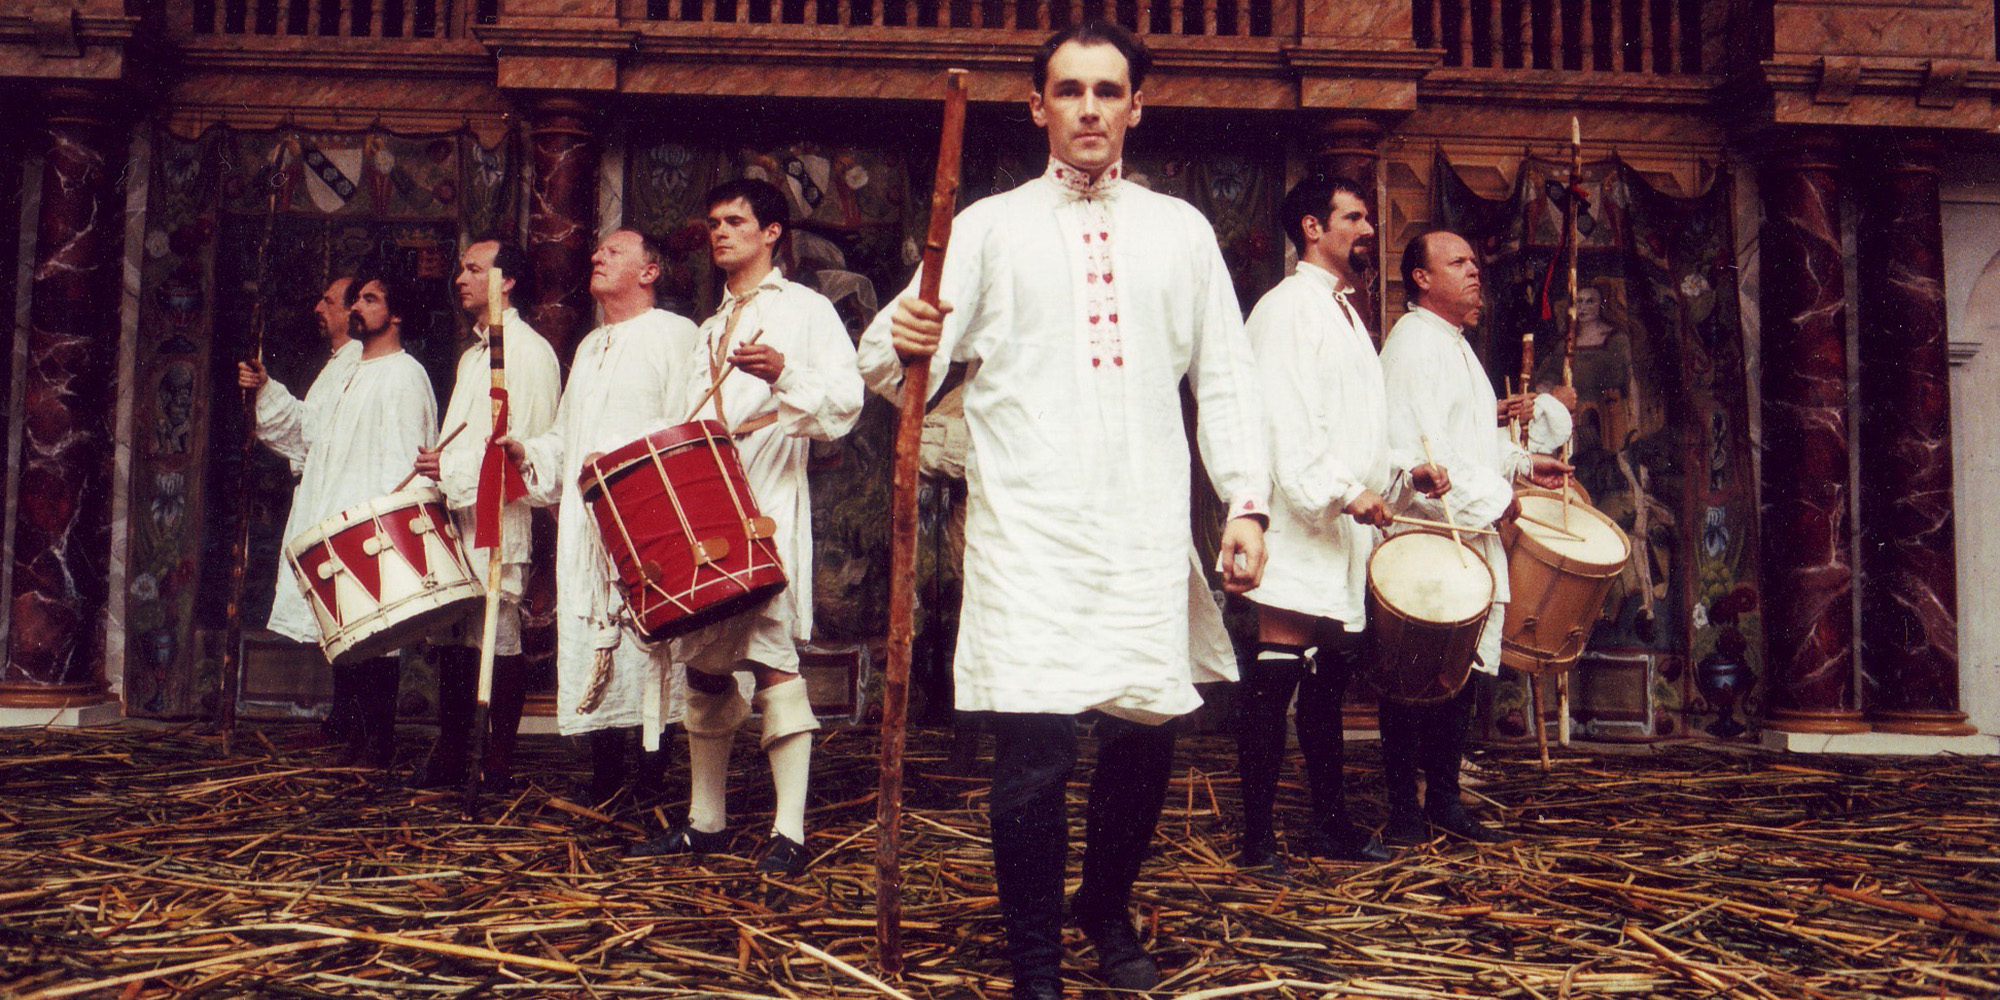 A group of actors wearing white tunics stand in a v-formation on a stage covered in straw.